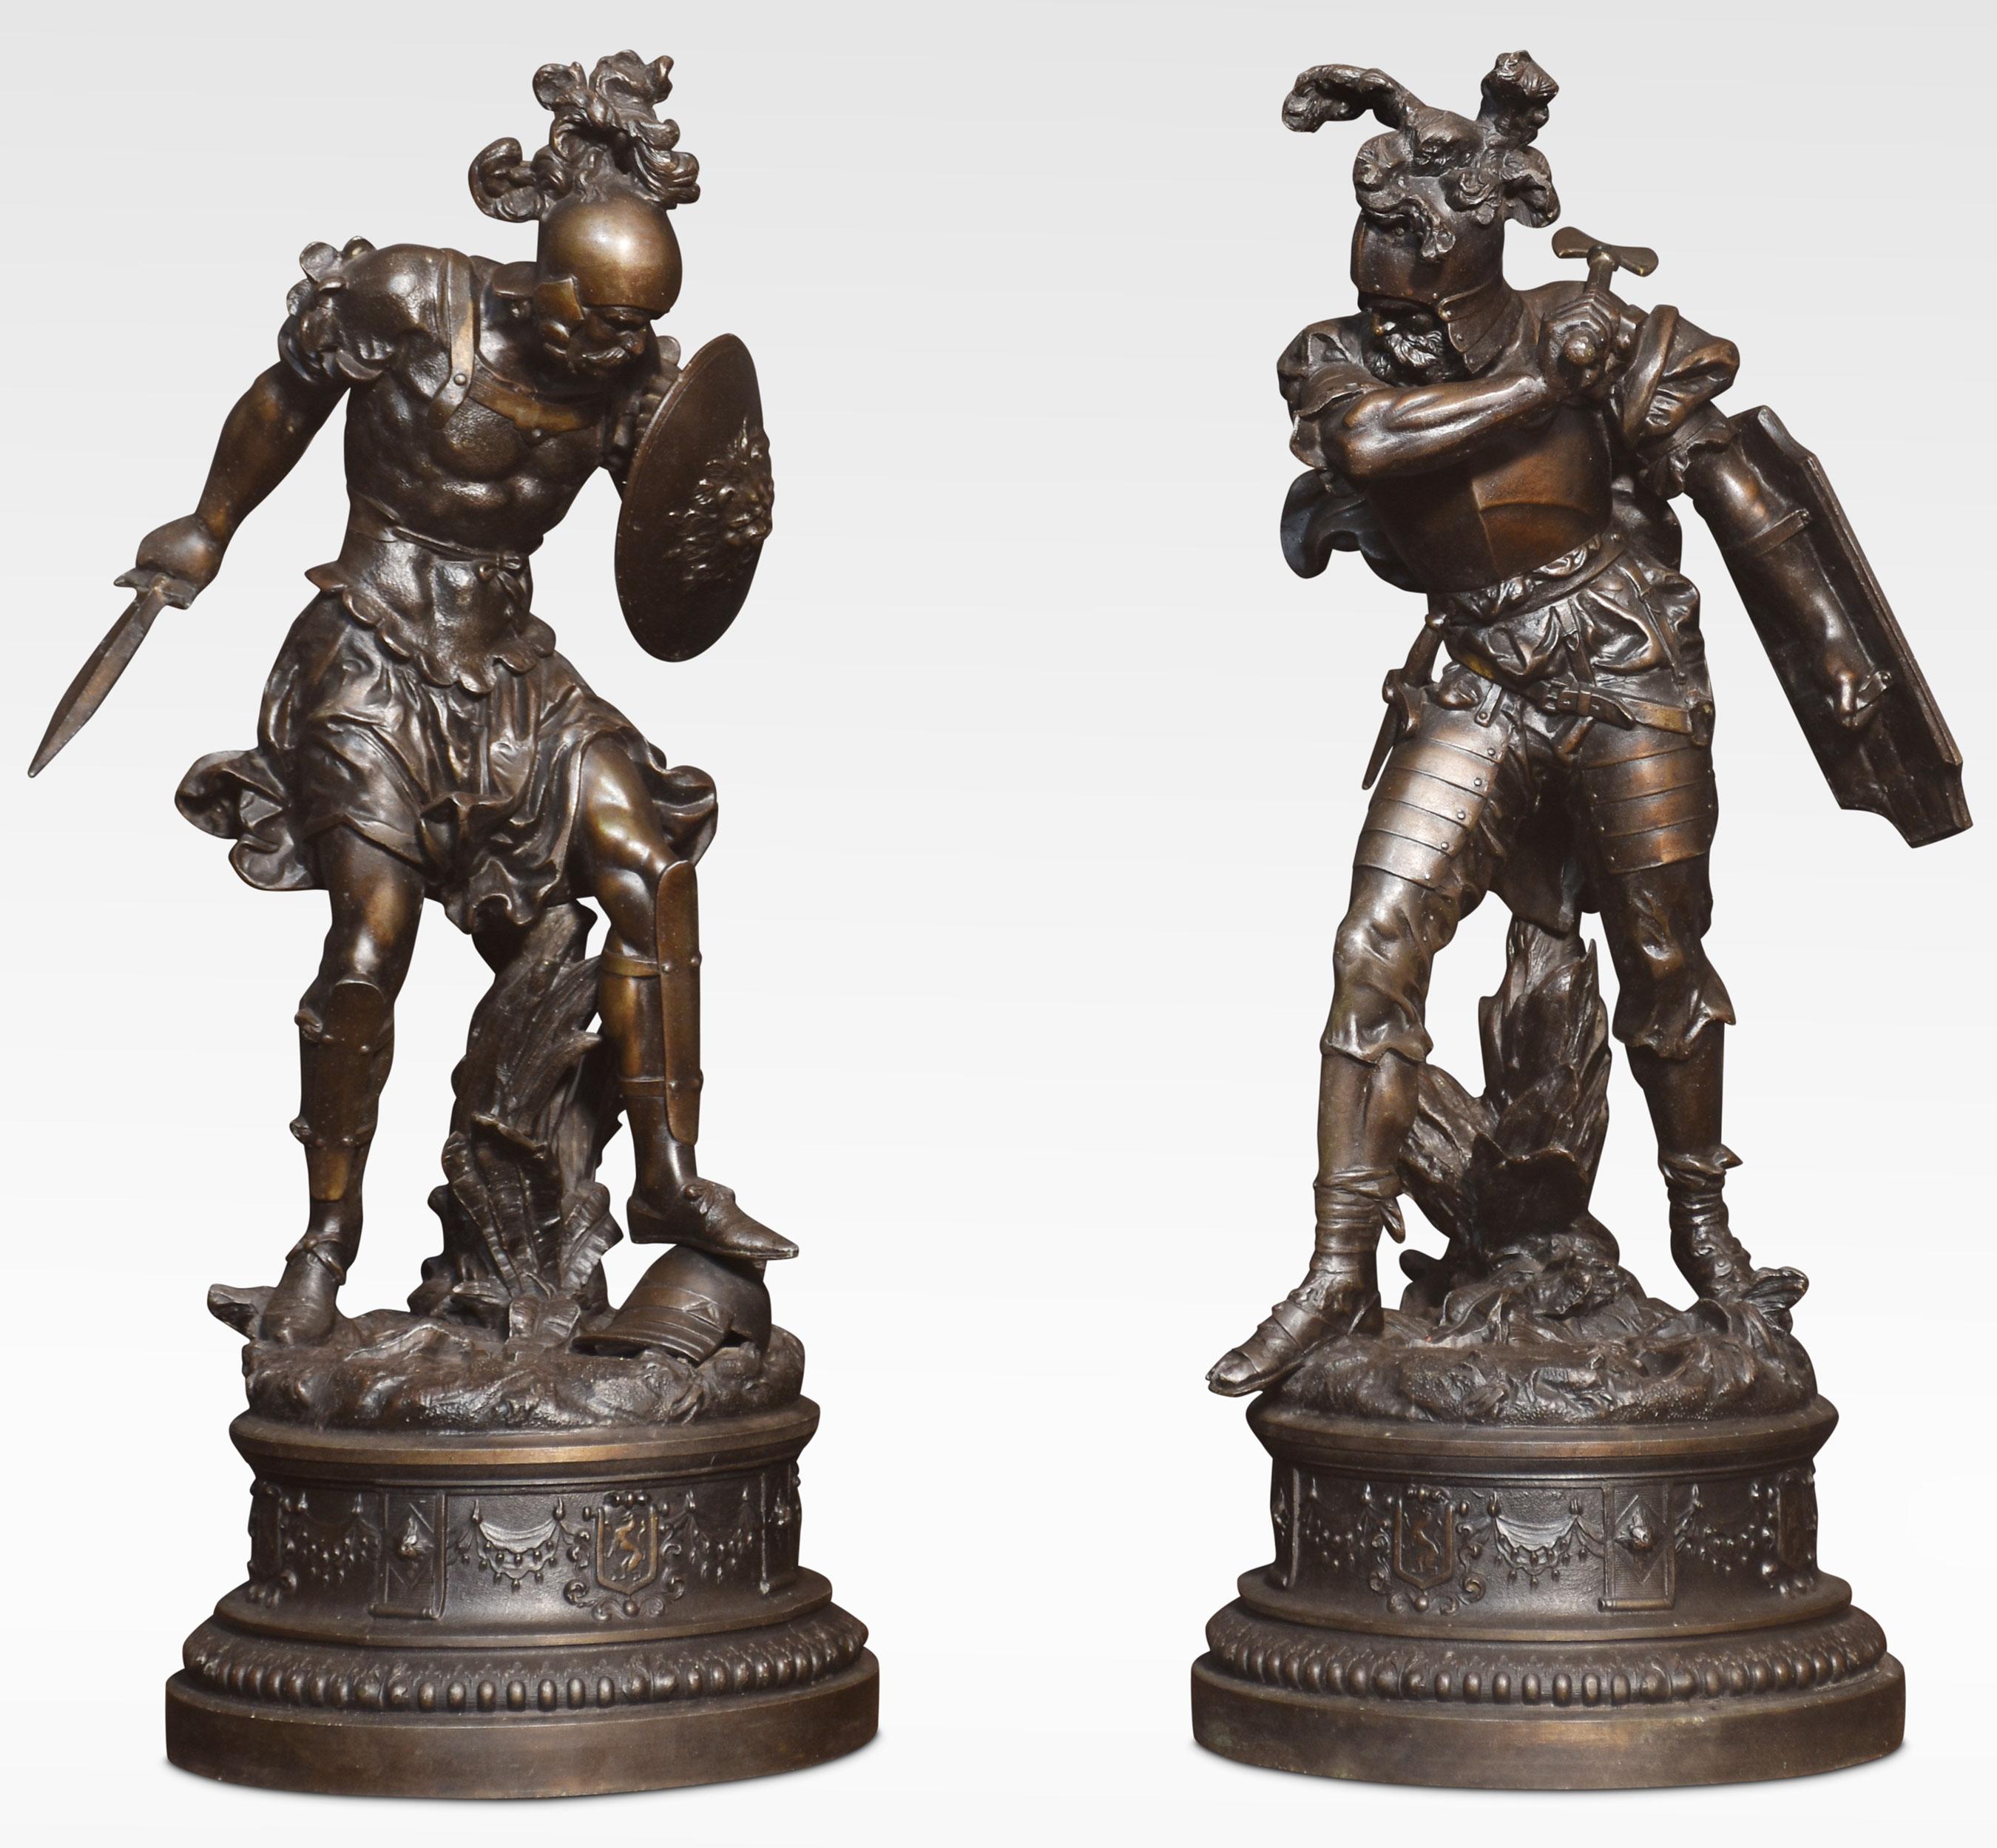 Pair of spelter Warriors, each crisply modelled in late medieval-style armour, one with swords raised the other an axe all raised on circular stepped plinth bases.
Dimensions
Height 20 Inches
Width 9 Inches
Depth 9 Inches